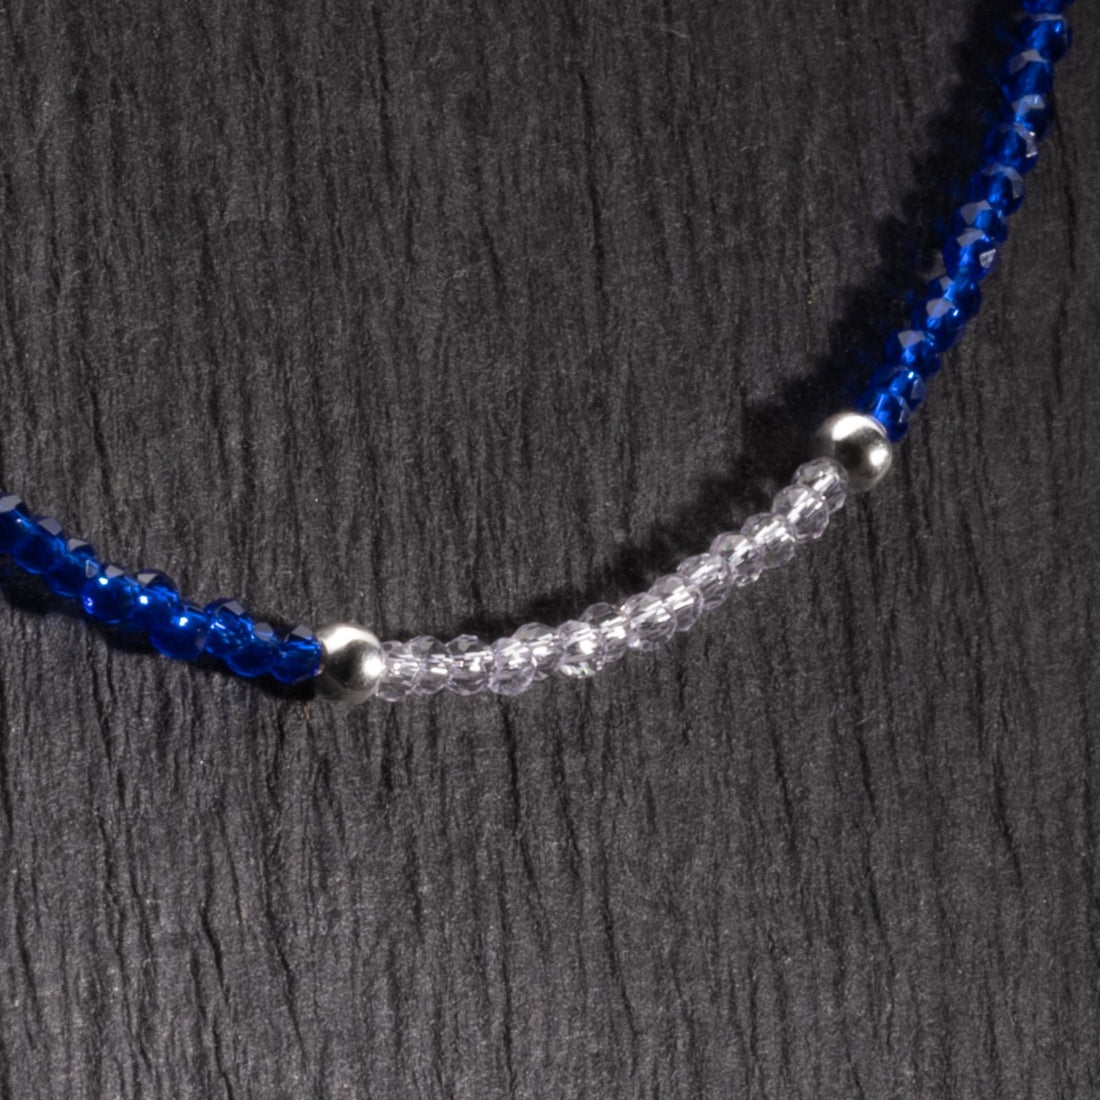 Real silver and dark blue beads anklets for women